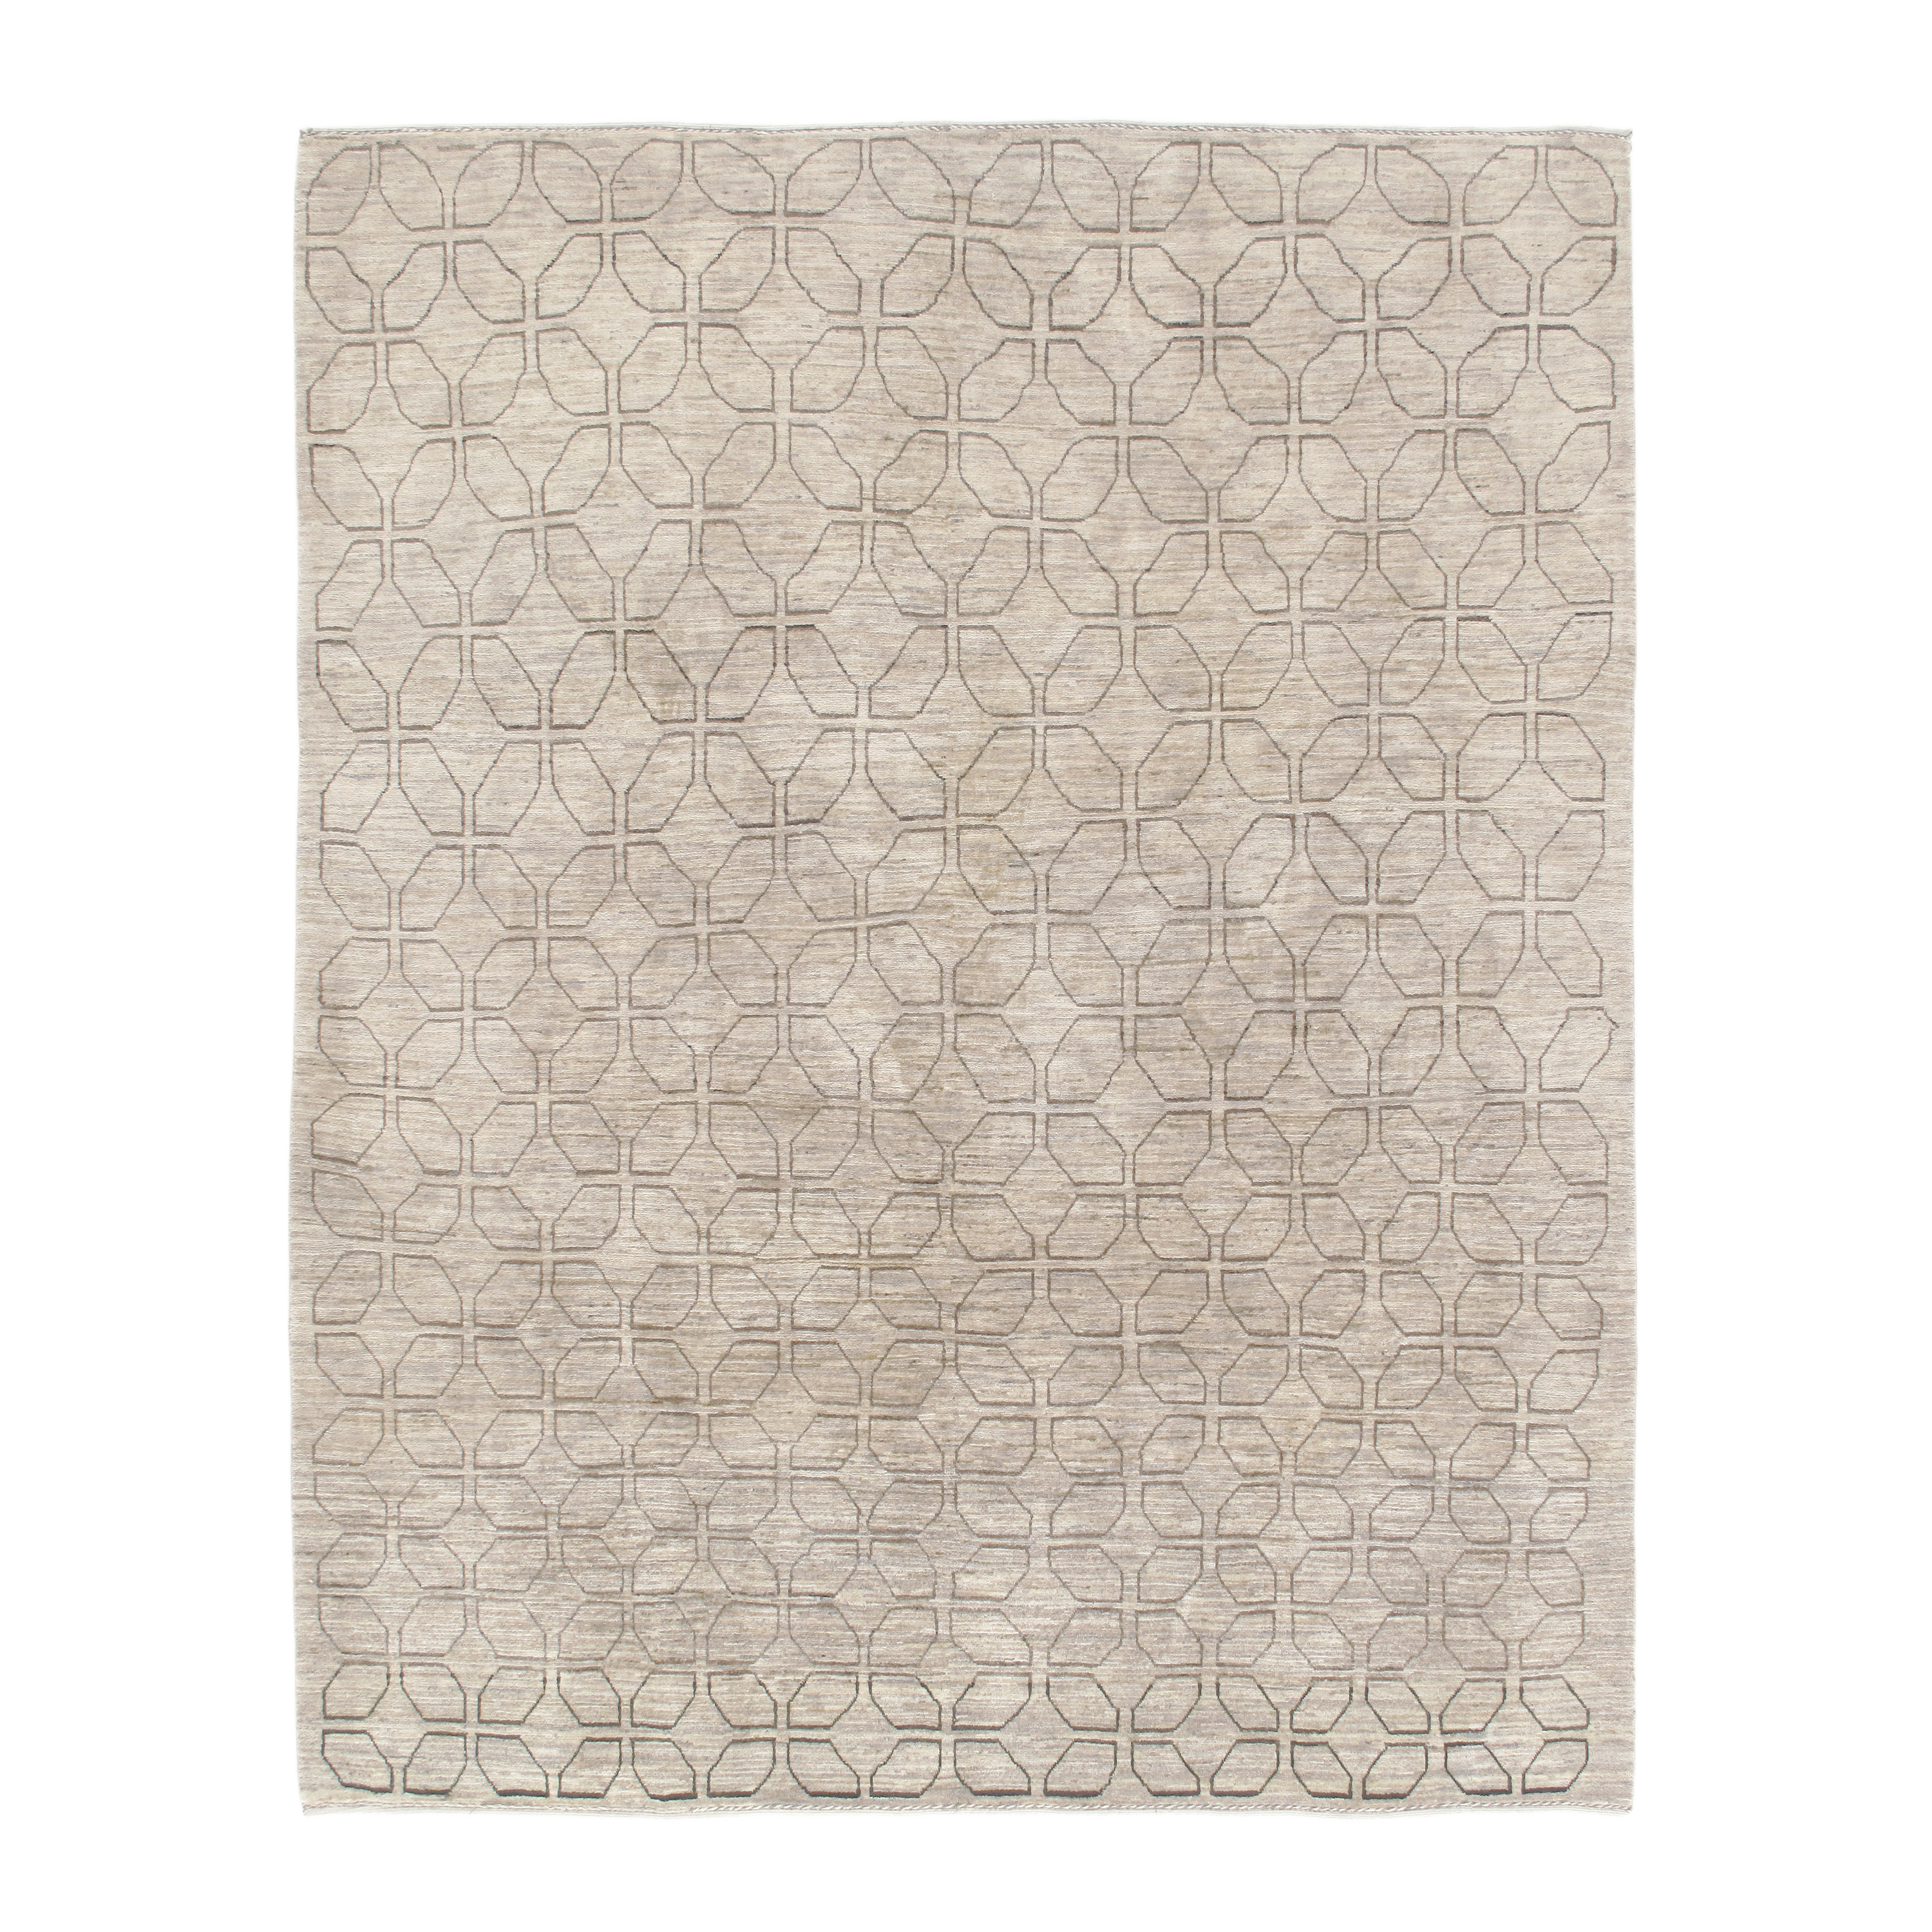 This Shiraz modern rug has Geometric Brown and ivory pattern rug hand-knotted, and made from the finest hand-spun, hand-carded undyed wool